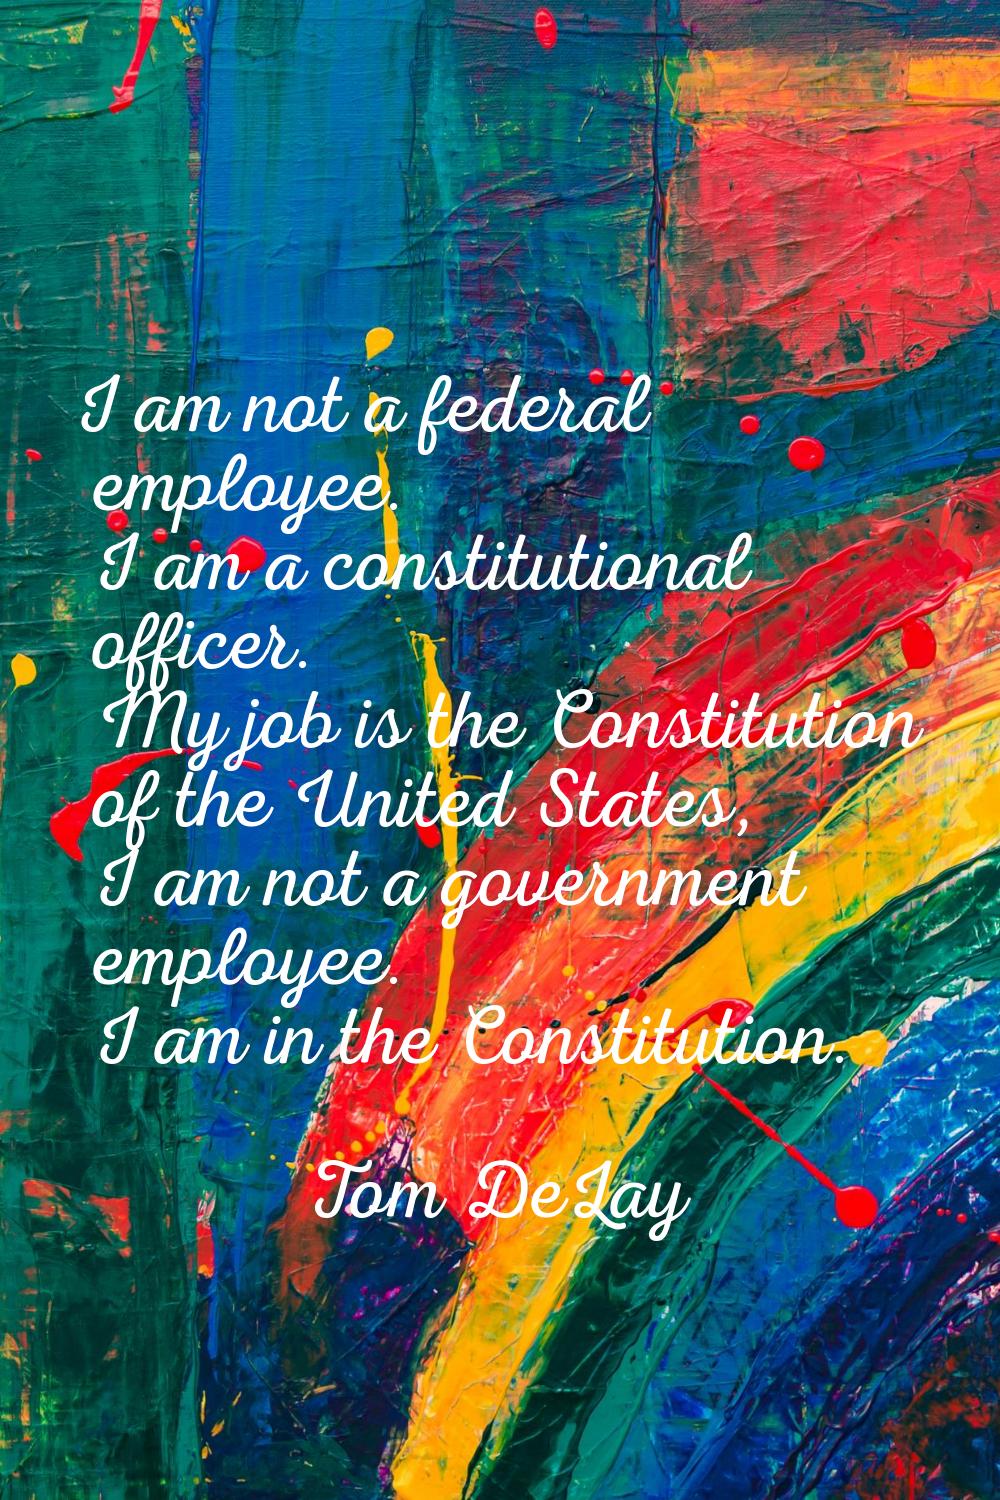 I am not a federal employee. I am a constitutional officer. My job is the Constitution of the Unite